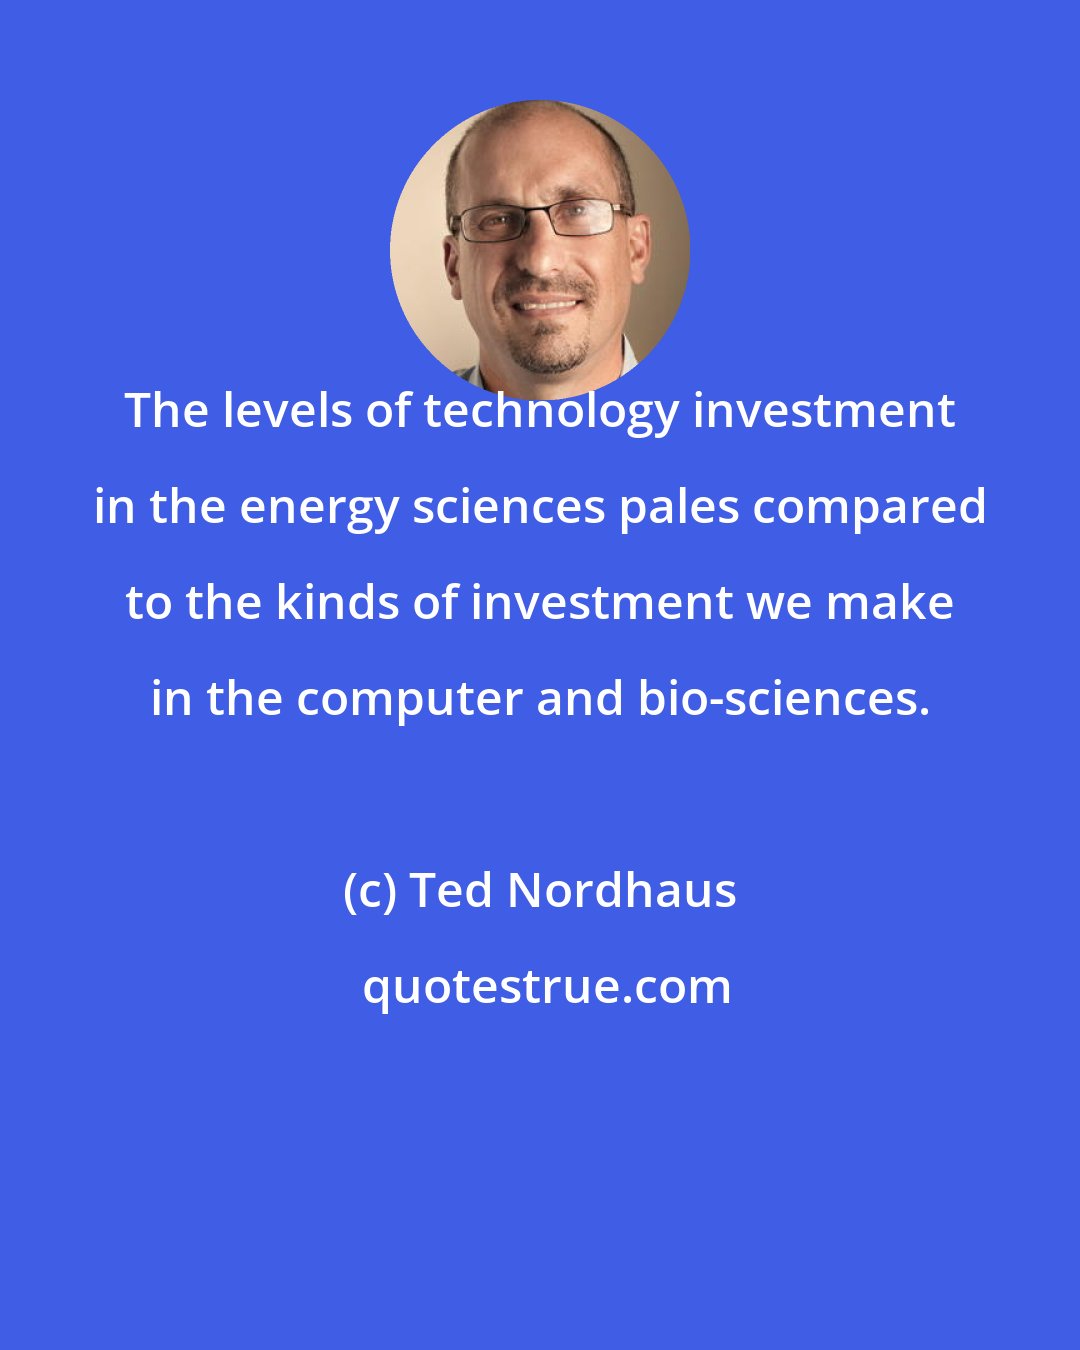 Ted Nordhaus: The levels of technology investment in the energy sciences pales compared to the kinds of investment we make in the computer and bio-sciences.